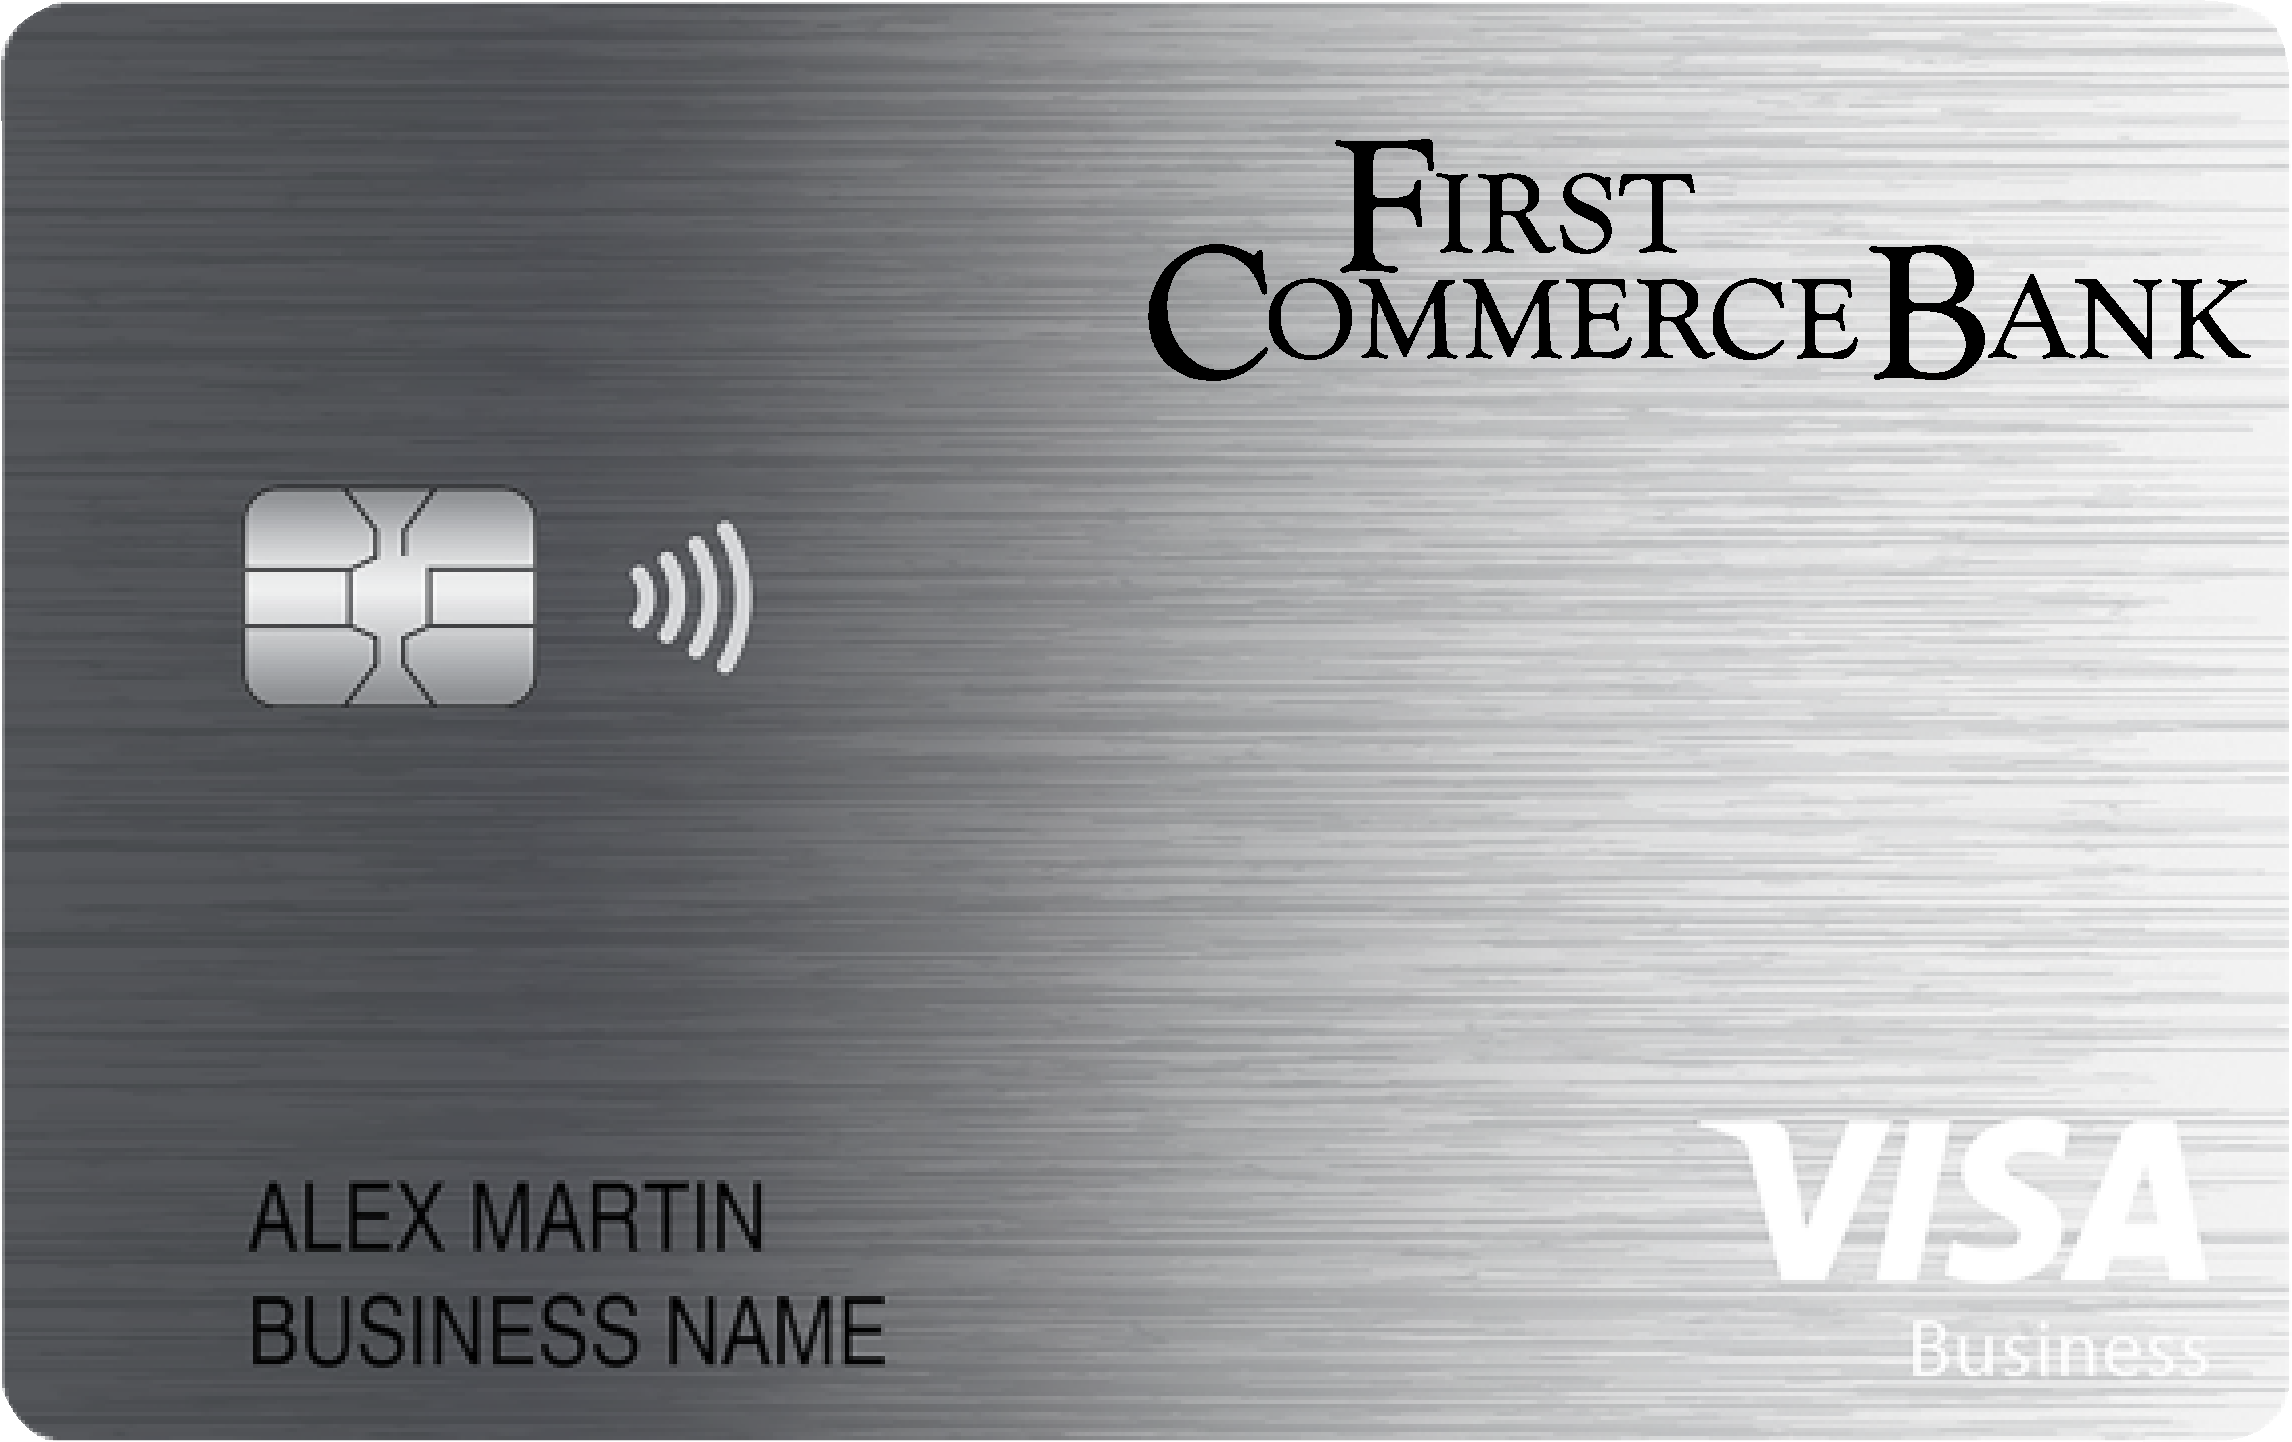 First Commerce Bank Business Real Rewards Card